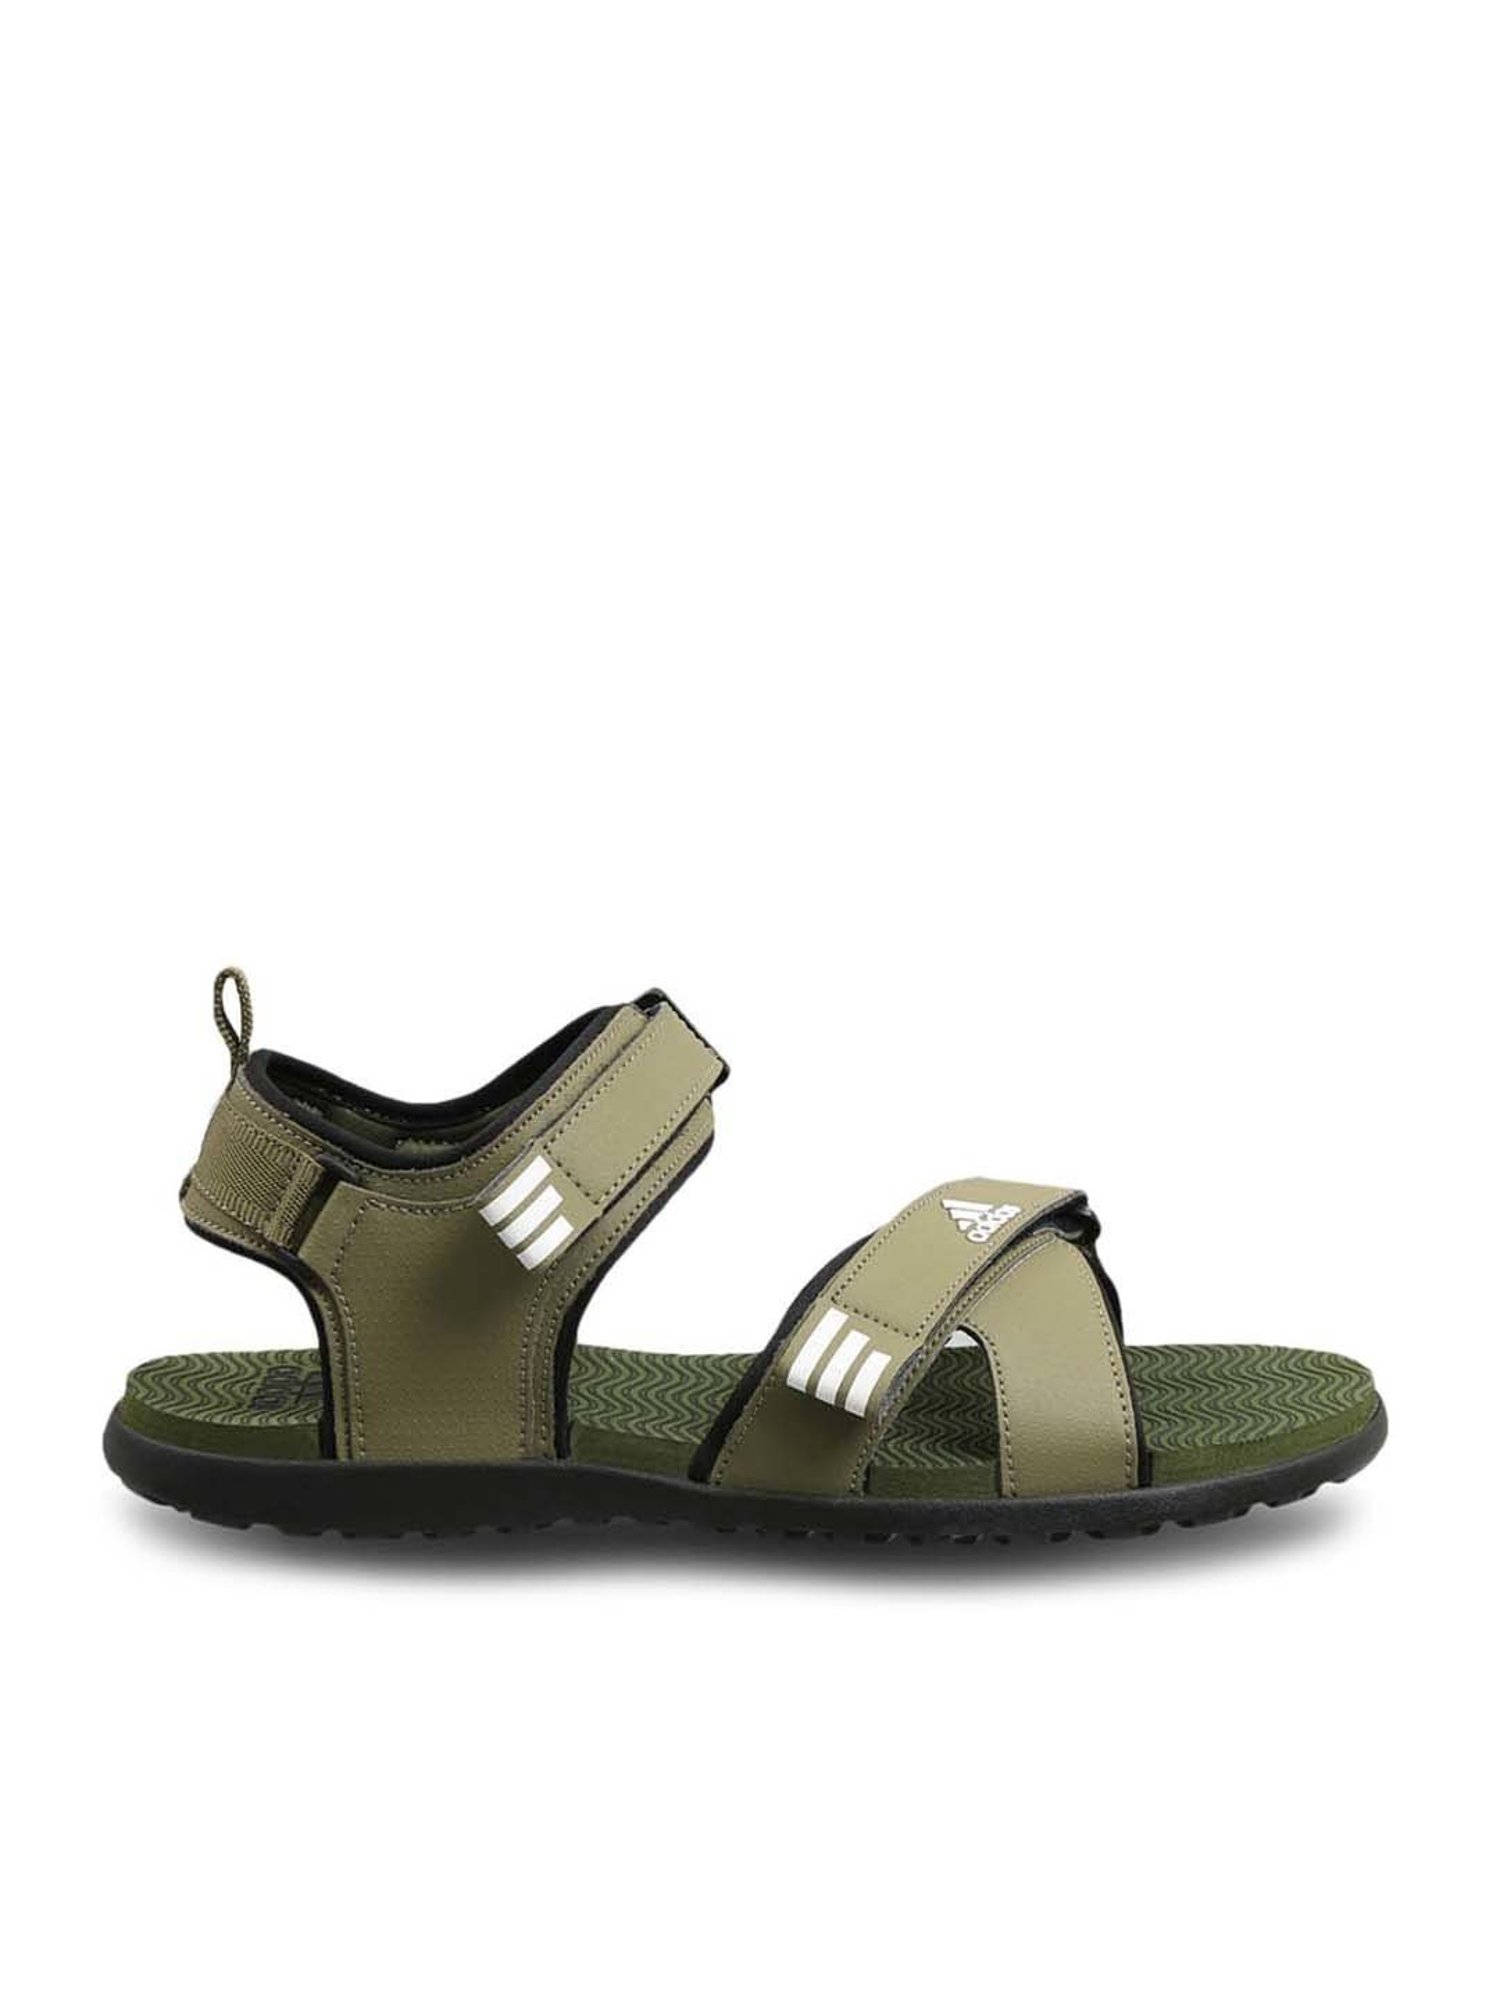 Adidas BLACK/WHITE SANDALS ::PARMAR BOOT HOUSE | Buy Footwear and  Accessories For Men, Women & Kids